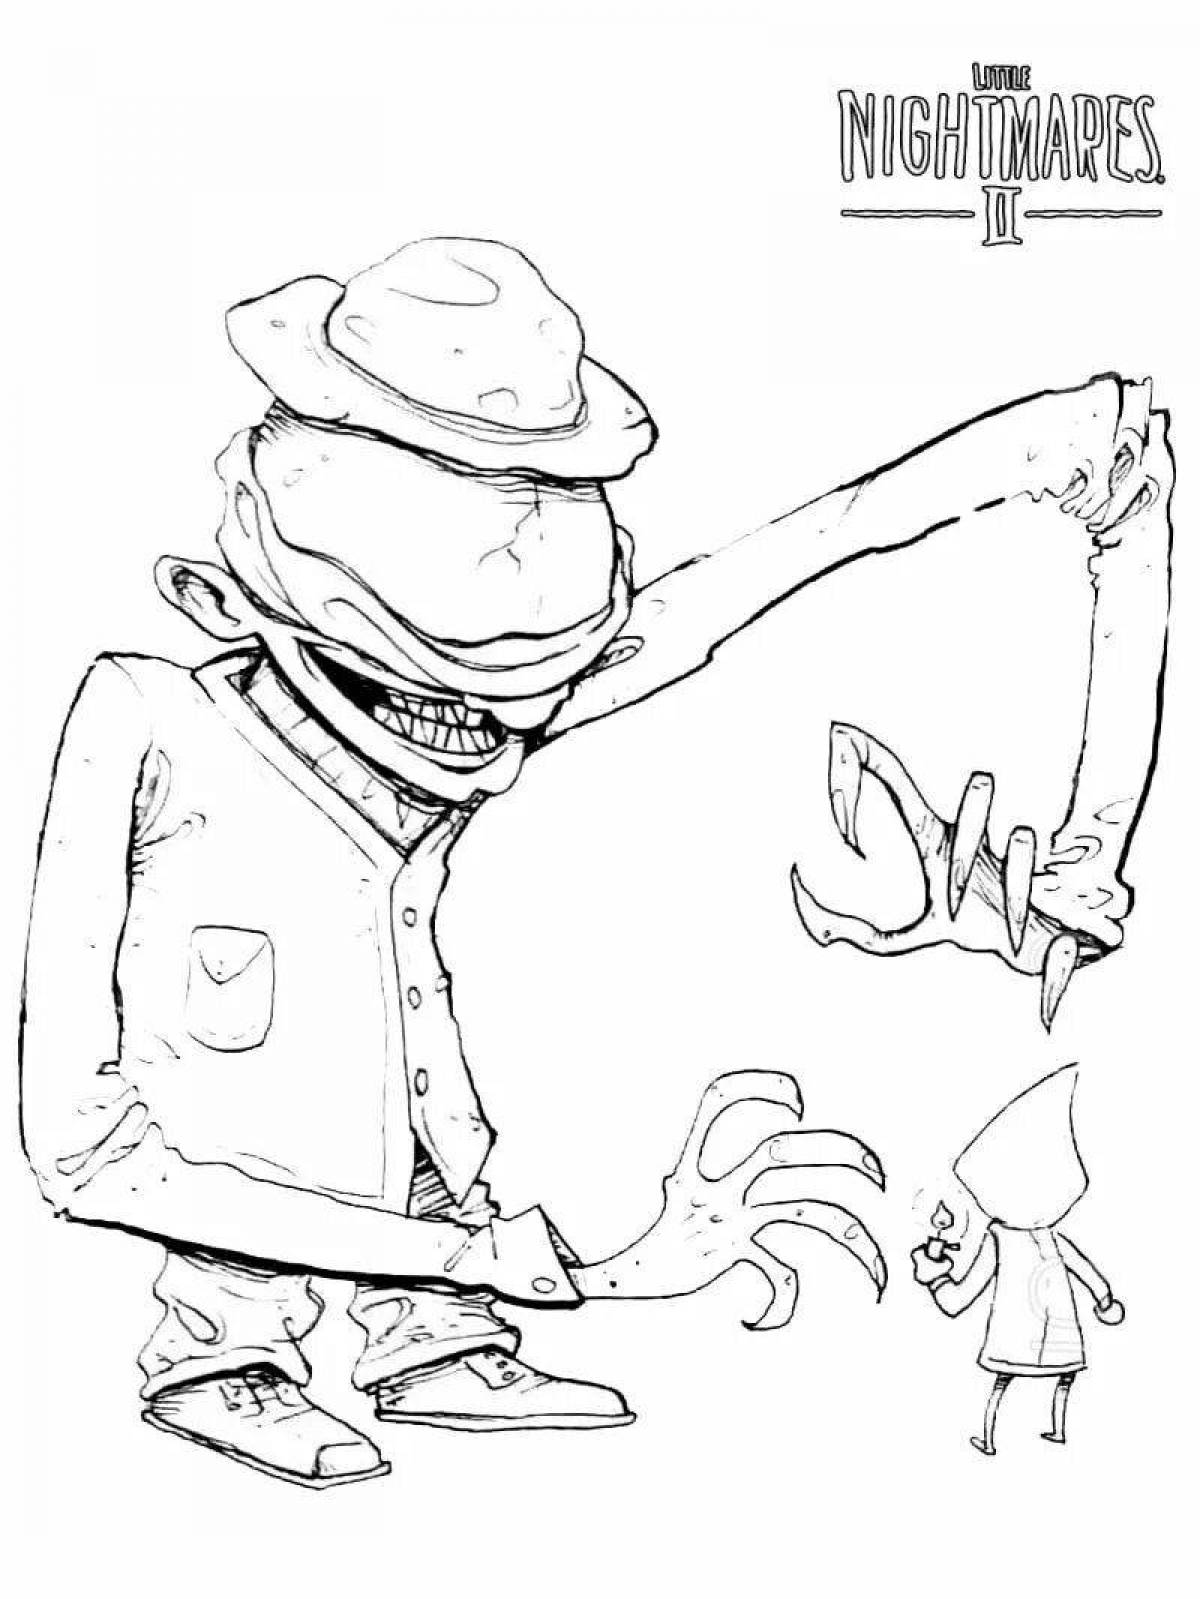 Sixth of little nightmares amazing coloring book